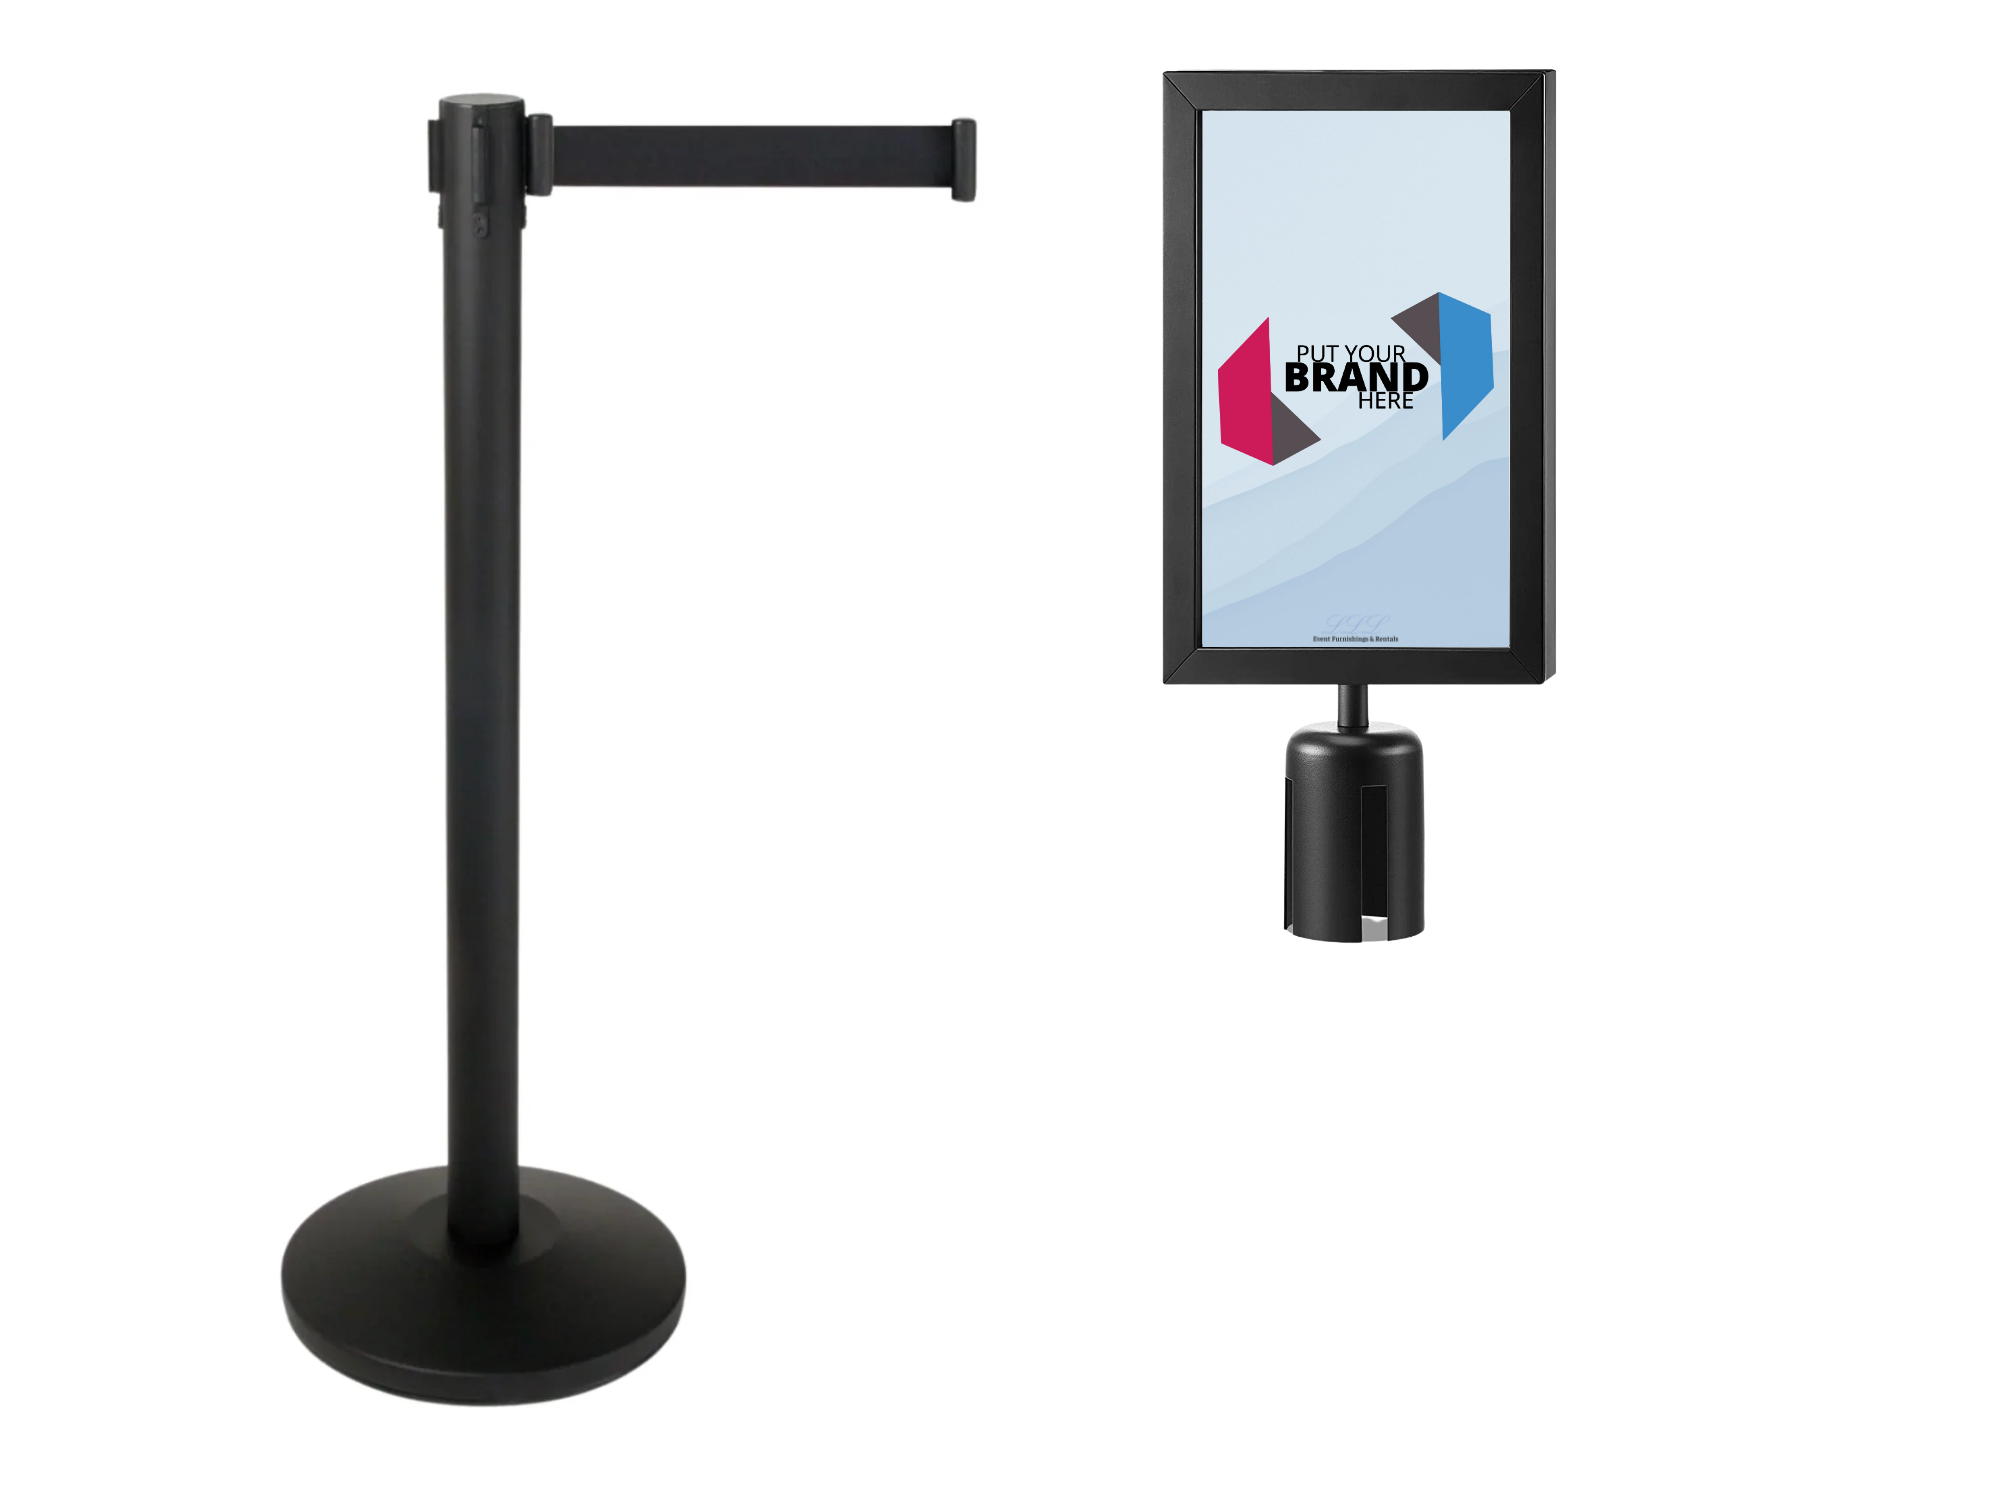 RETRACTABLE STANCHION W/ BRANDABLE DOUBLE-SIDED SIGN